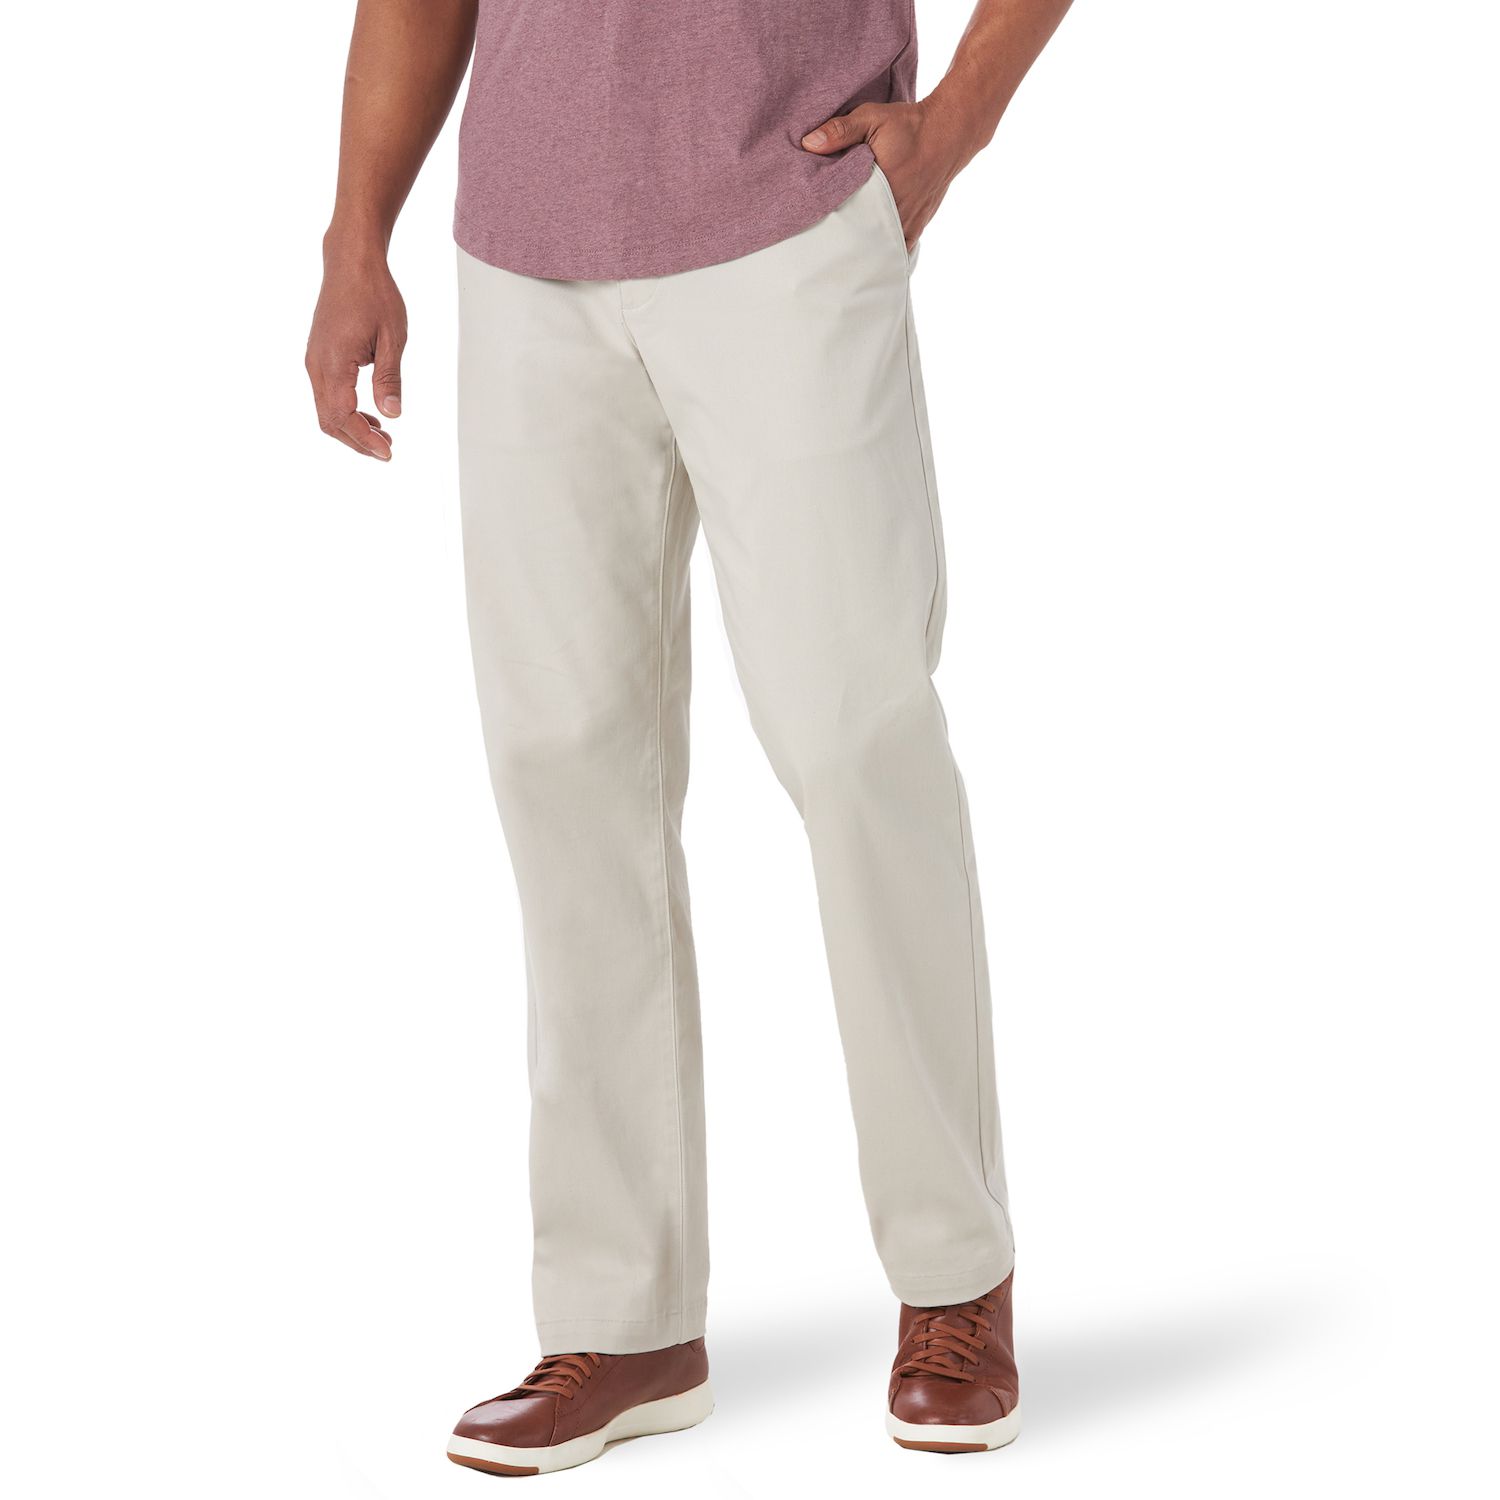 Image for Lee Men's Extreme Comfort MVP Straight-Fit Flat-Front Pants at Kohl's.